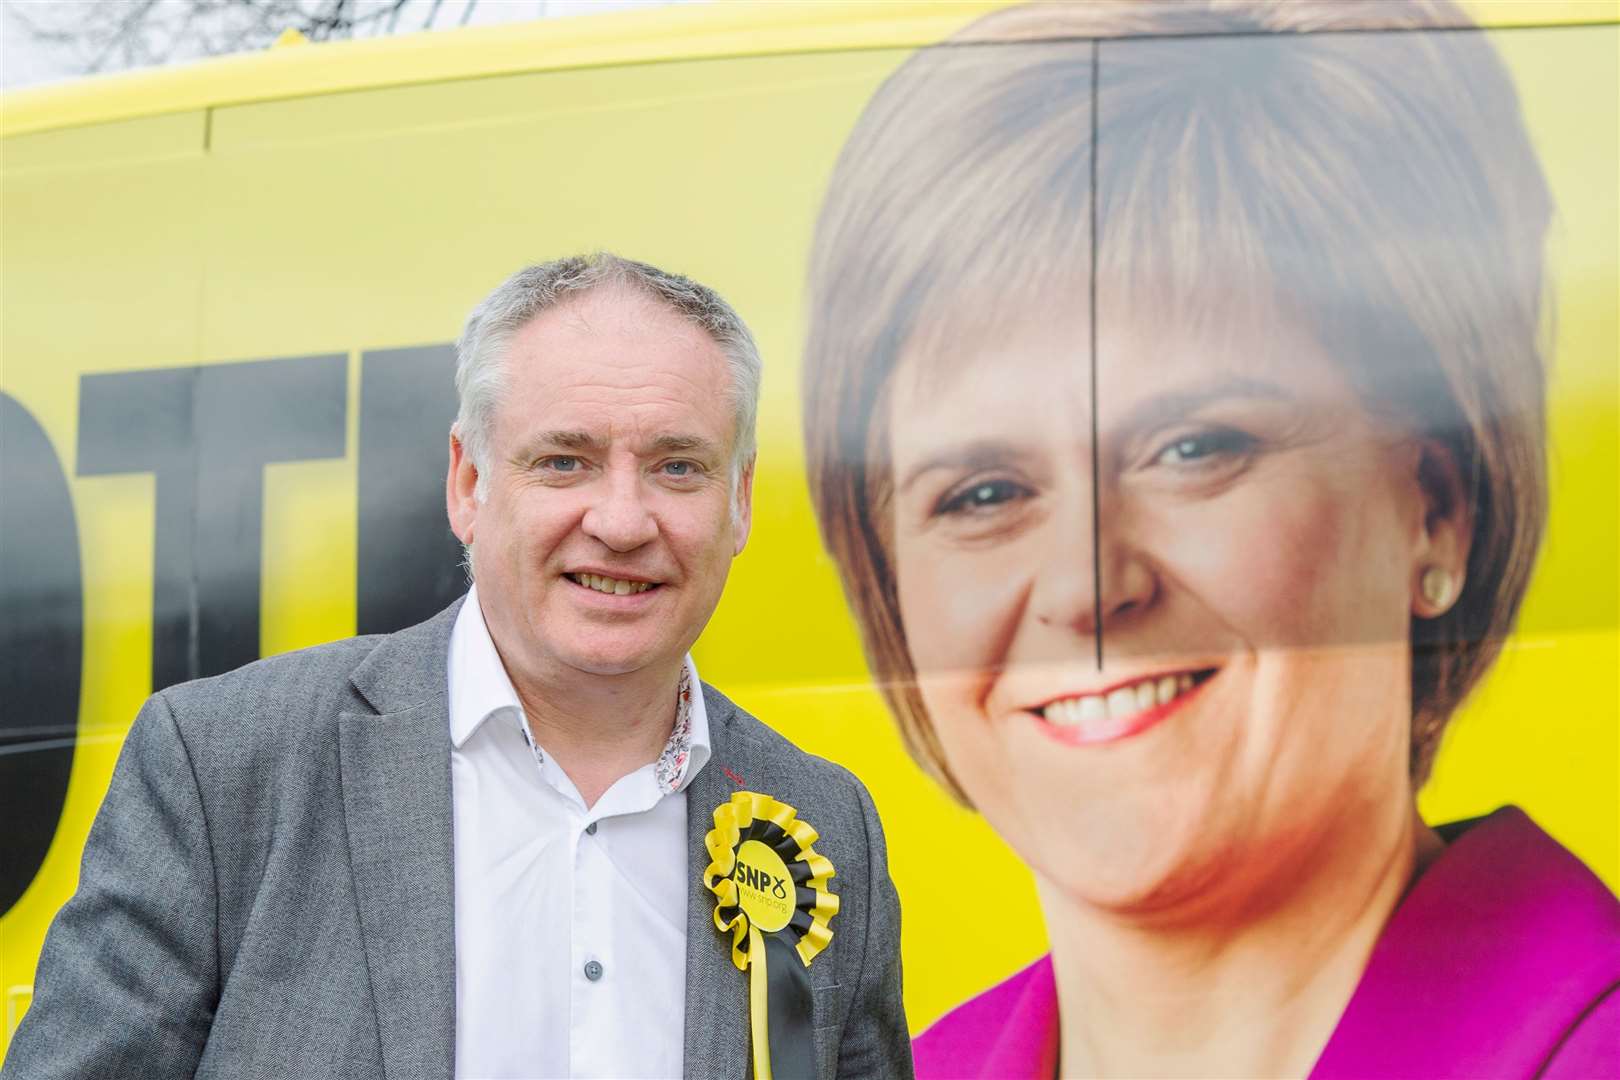 Moray SNP candidate Richard Lochhead alongside a photo of the First Minister Nicola Sturgeon on the SNP Campaign Bus at Keith...Picture: Daniel Forsyth..